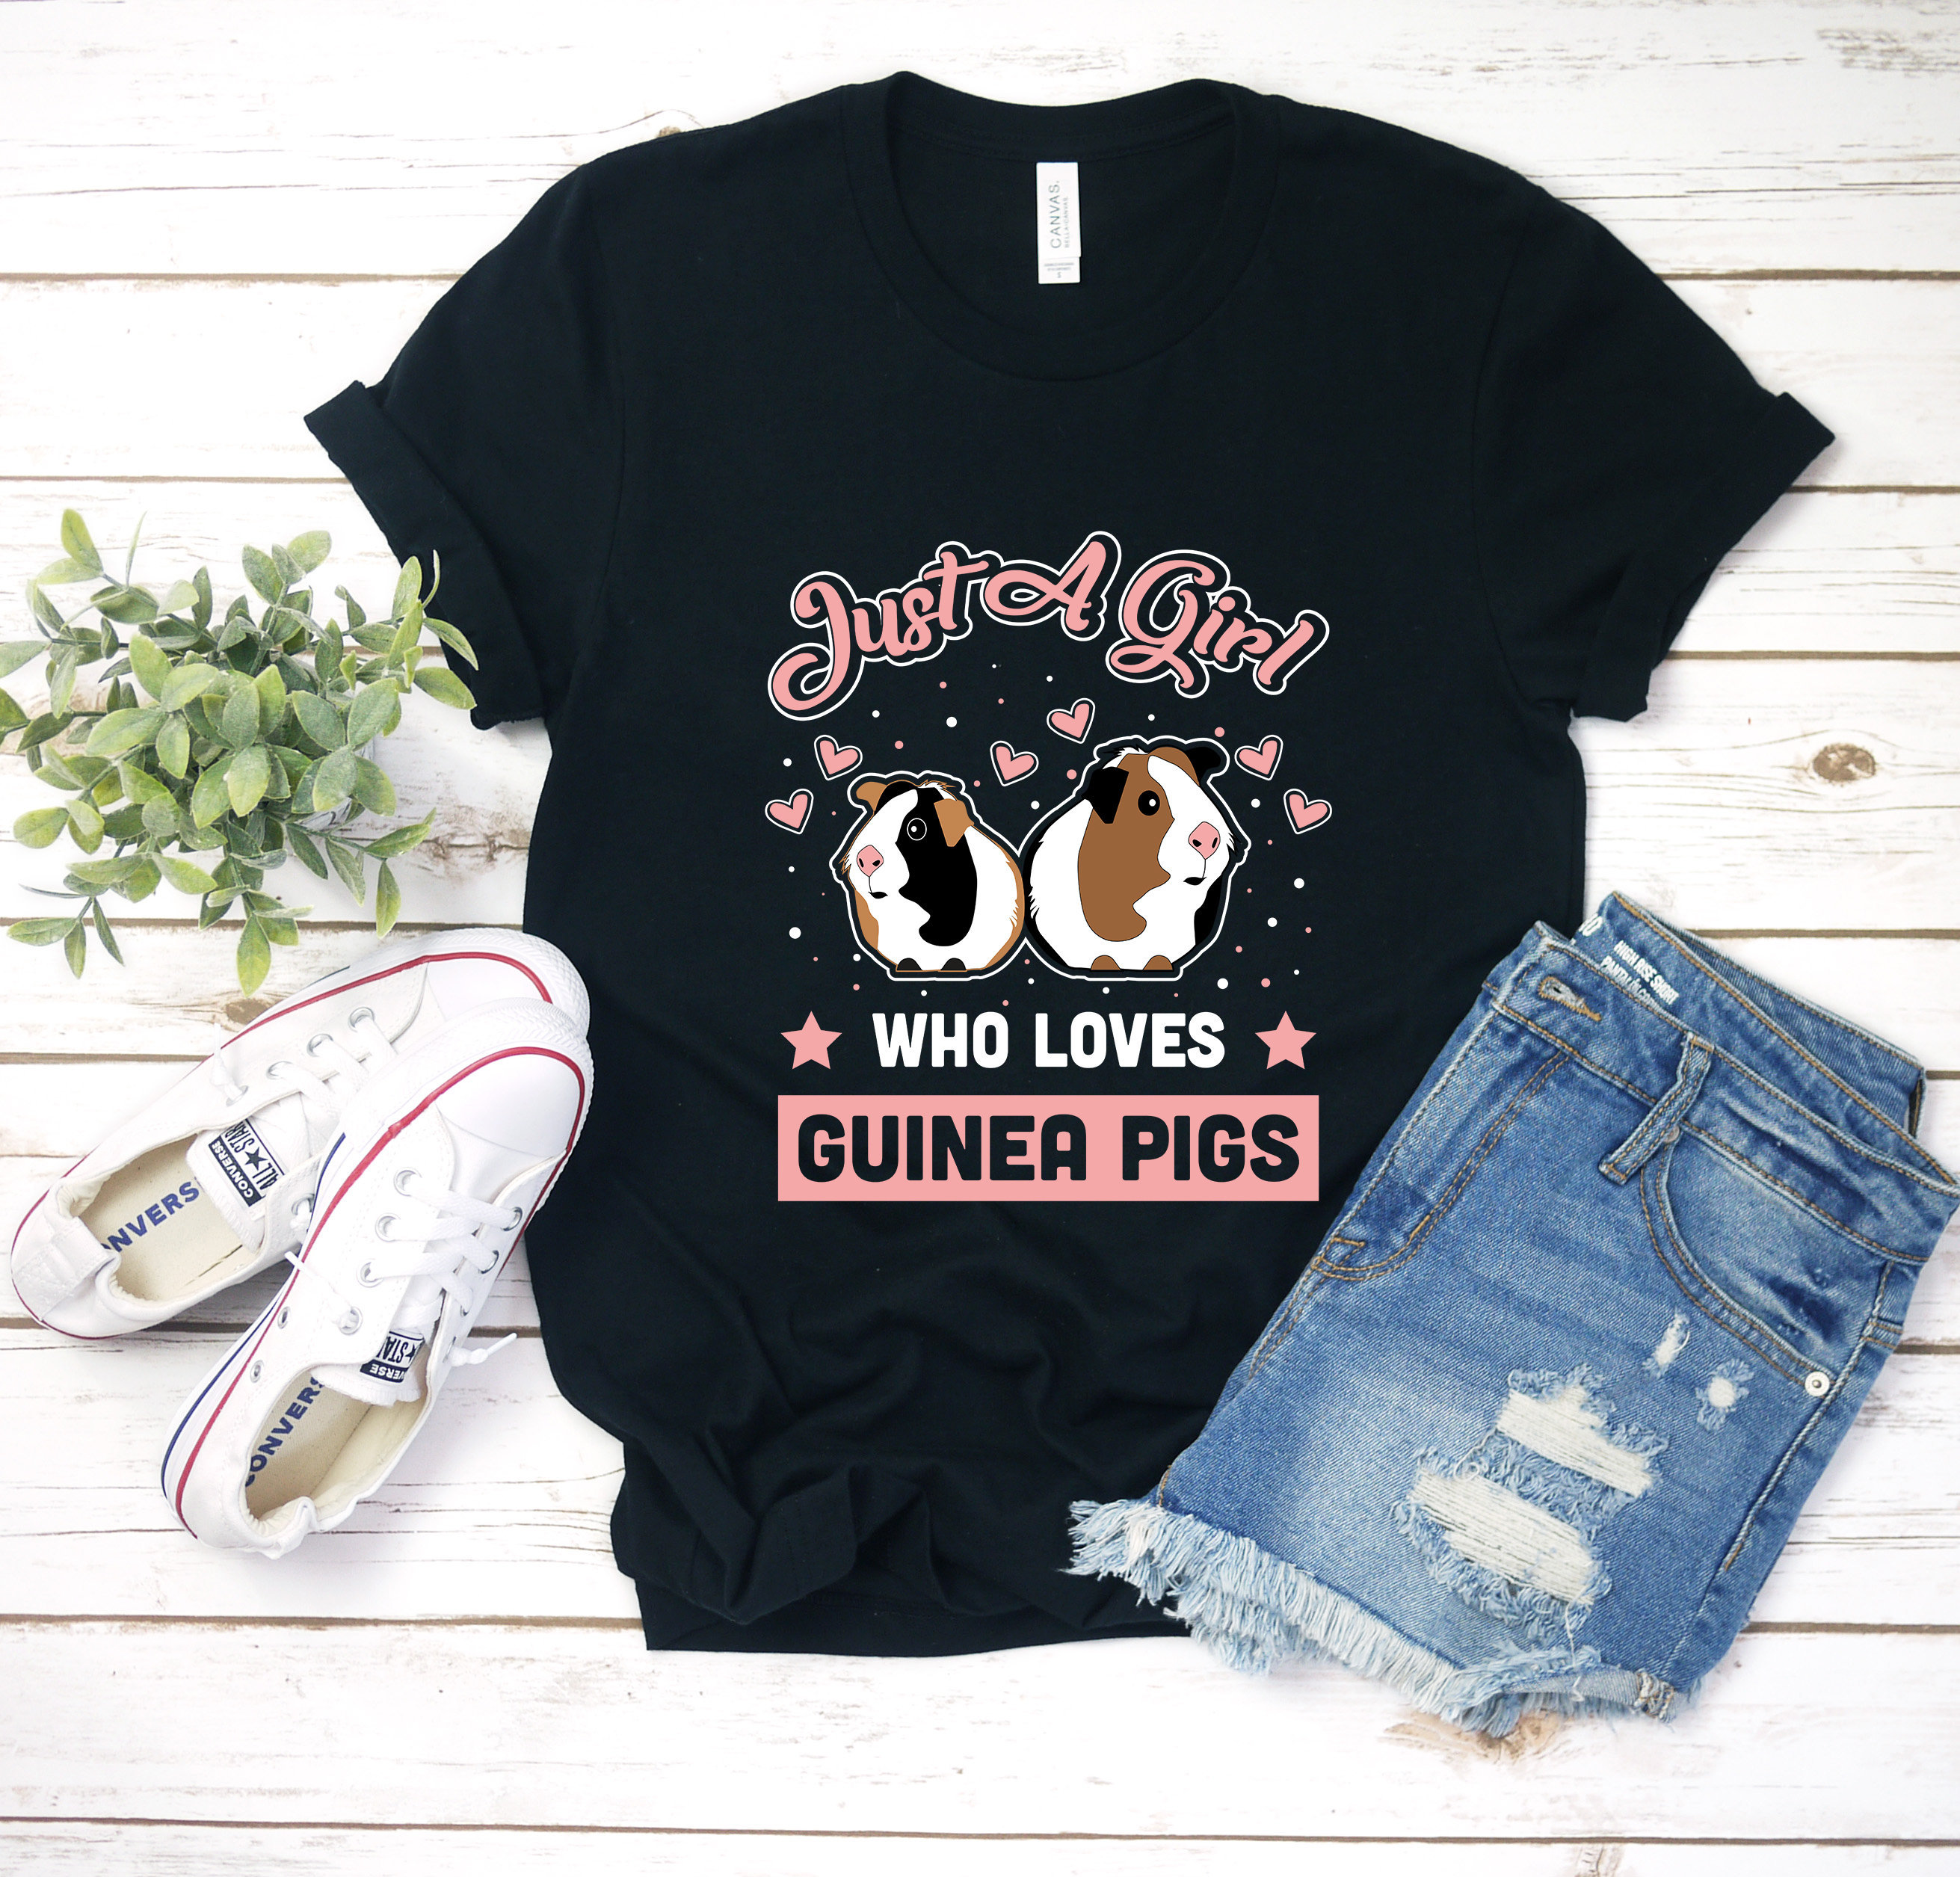 Just a Girl Who Loves Guinea Pigs Shirt  Guinea Pig Shirt  Guinea Pig Gifts  Flower Shirt  Floral Design  Pig Lover  Tank Top  Hoodie